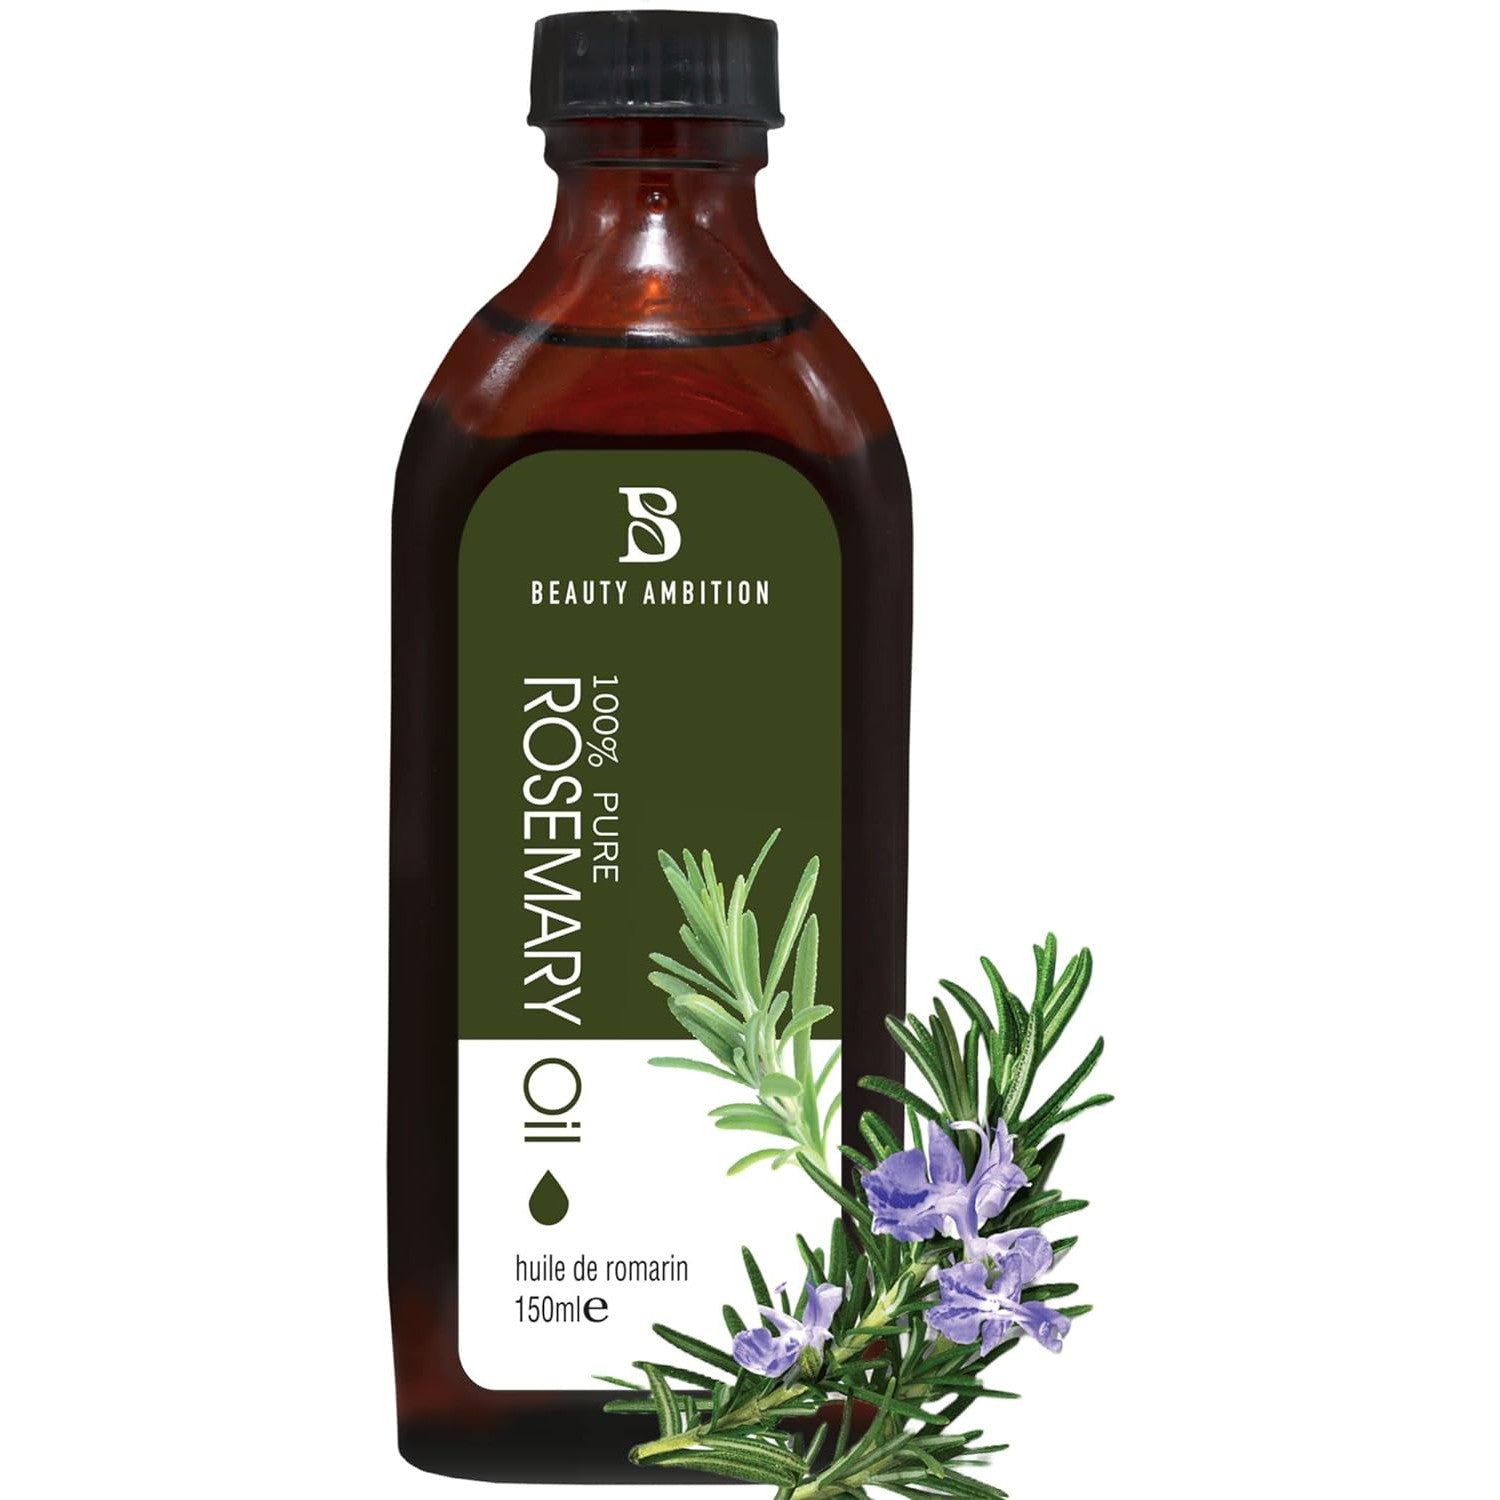 Beauty Ambition Rosemary Oil 100% Natural and Herbal 150ml